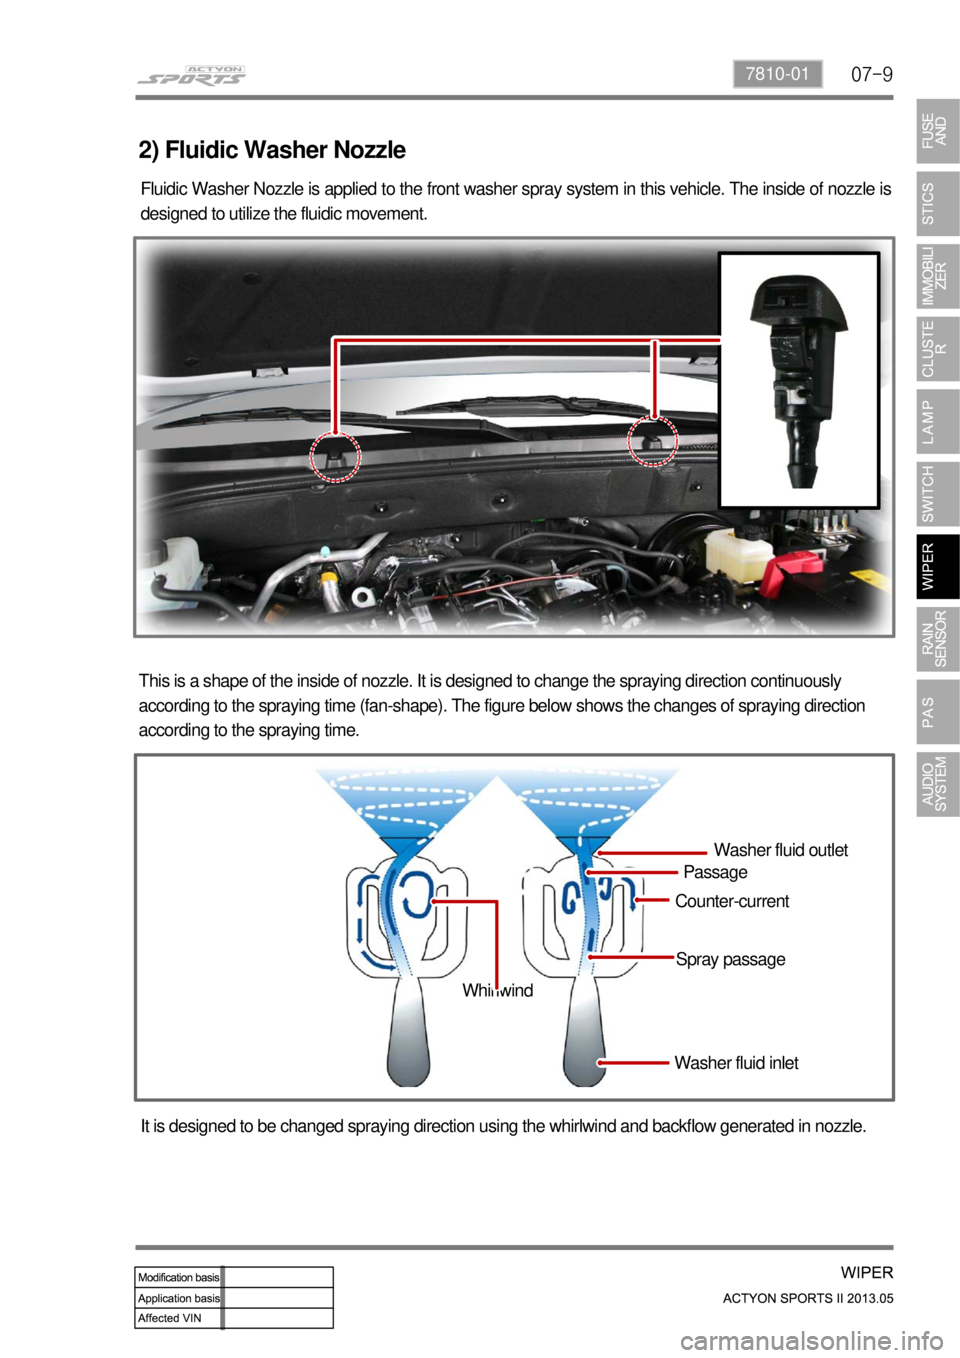 SSANGYONG NEW ACTYON SPORTS 2013 User Guide 07-97810-01
2) Fluidic Washer Nozzle
Fluidic Washer Nozzle is applied to the front washer spray system in this vehicle. The inside of nozzle is 
designed to utilize the fluidic movement.
This is a sha